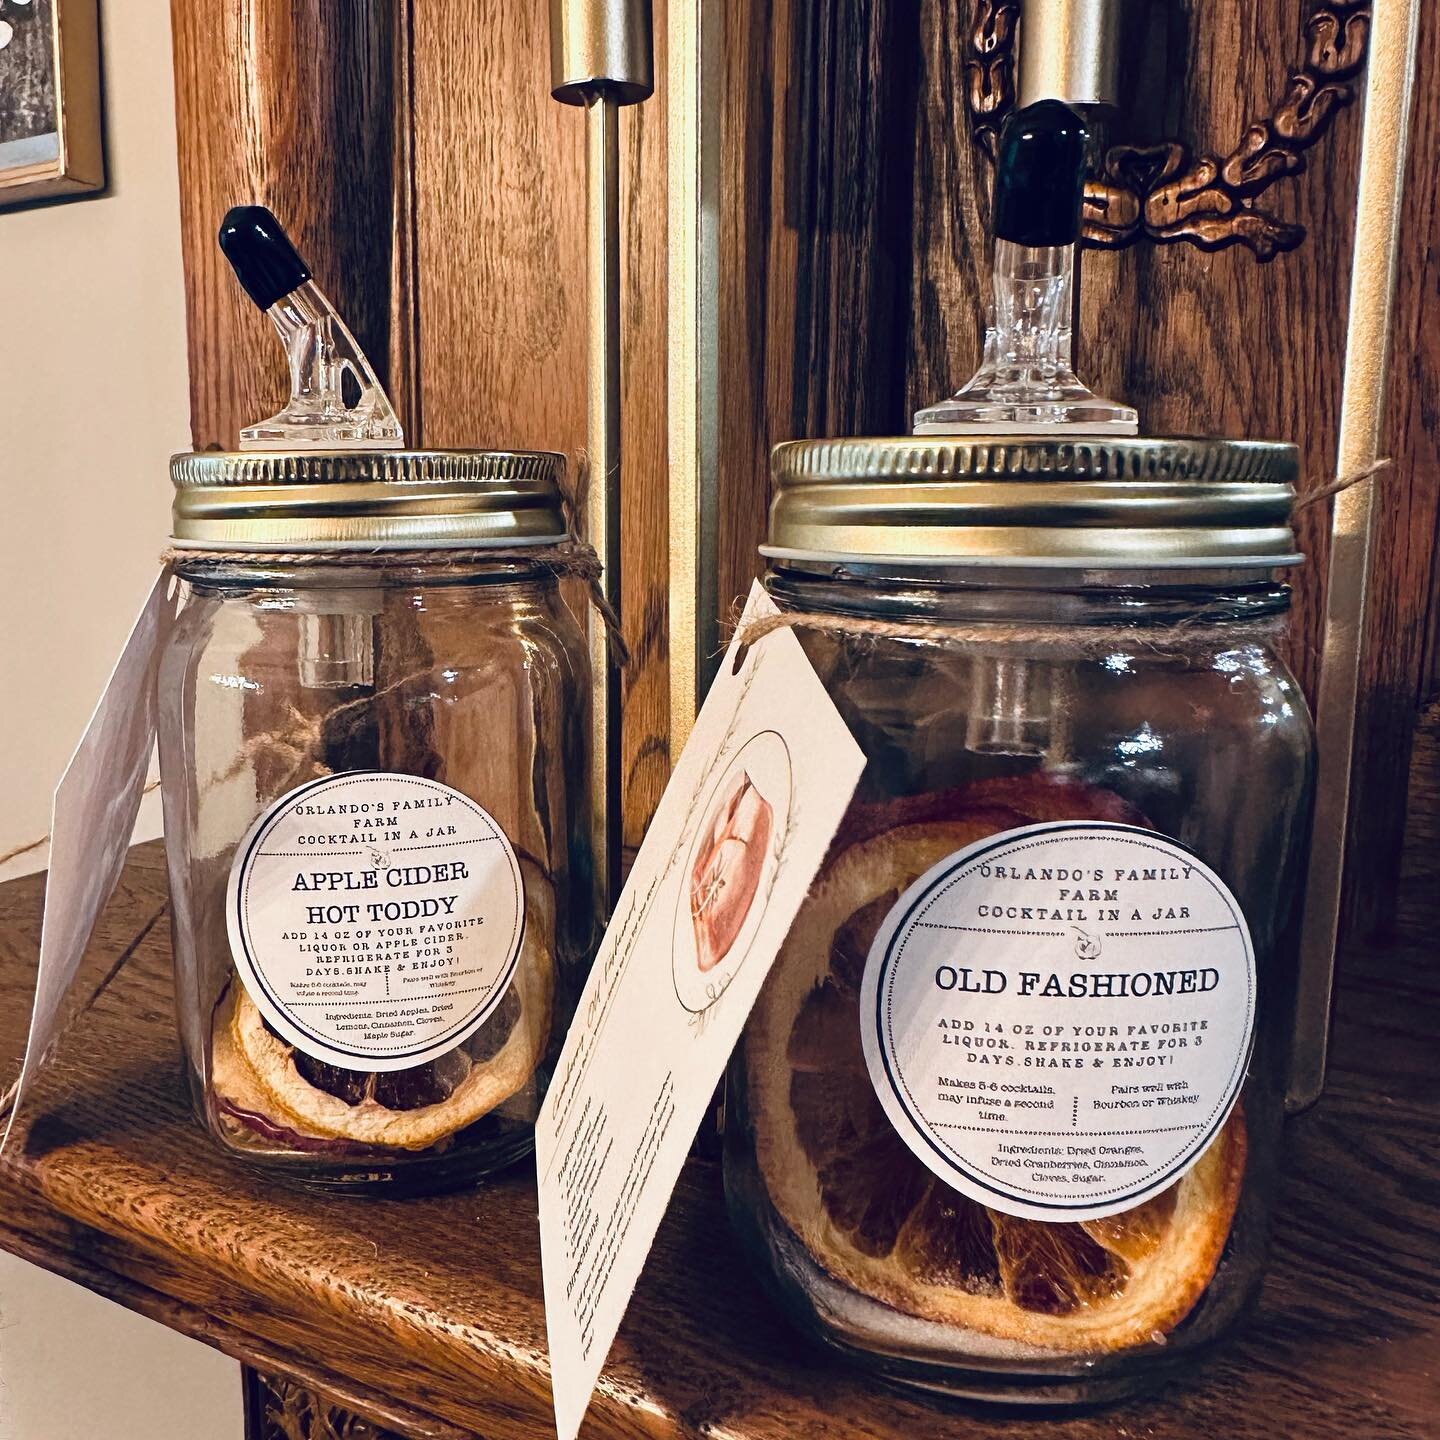 Our Old Fashioned &amp; Apple Cider Hot Toddy cocktail kits have been a hit this fall! We restocked them, so come grab one for your next cozy fall evening cocktails. If you&rsquo;ve tried them, which one is your favorite? 🥃 #cocktailkit #cocktailins